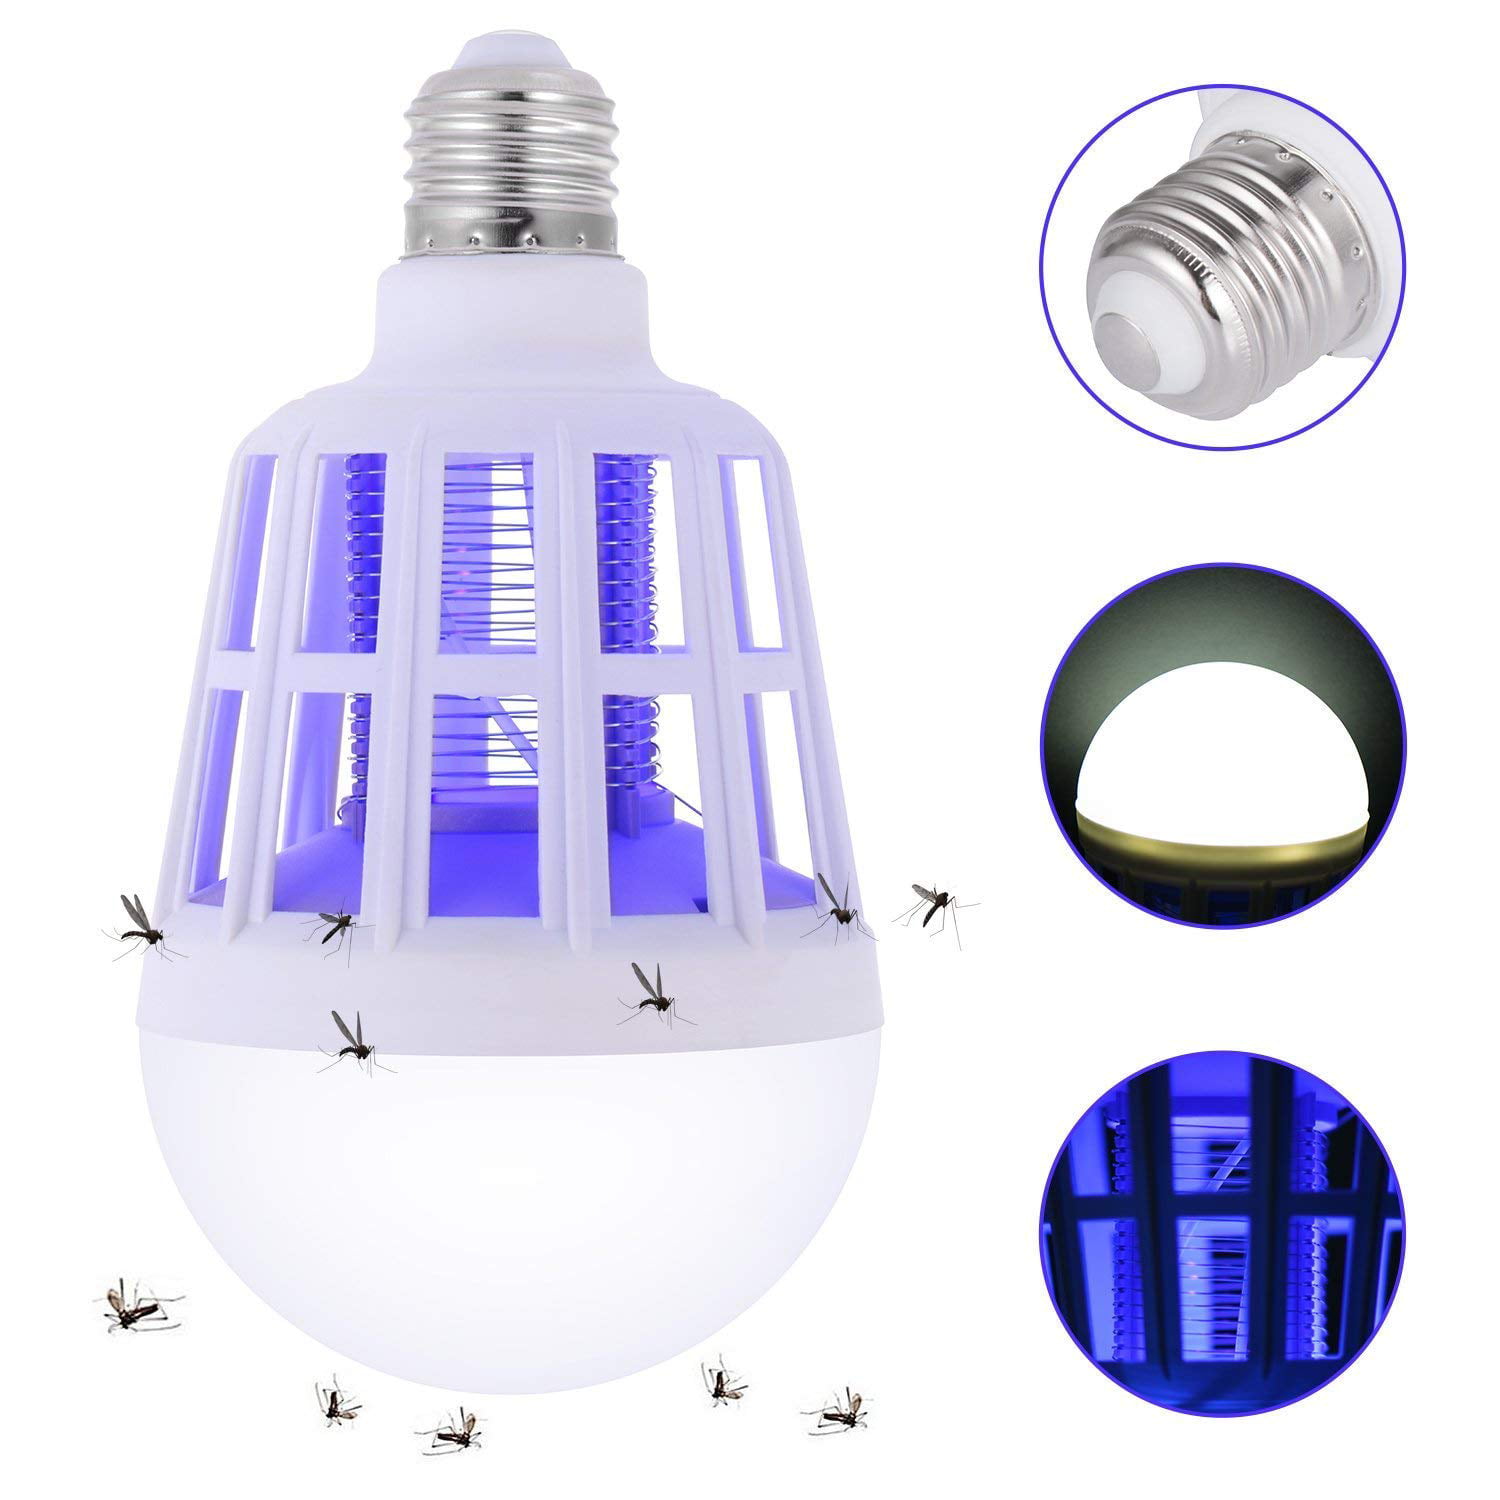 Details about   2Pack Electric UV Mosquito Killer Lamp Outdoor Indoor Fly Bug Insect Zapper Trap 